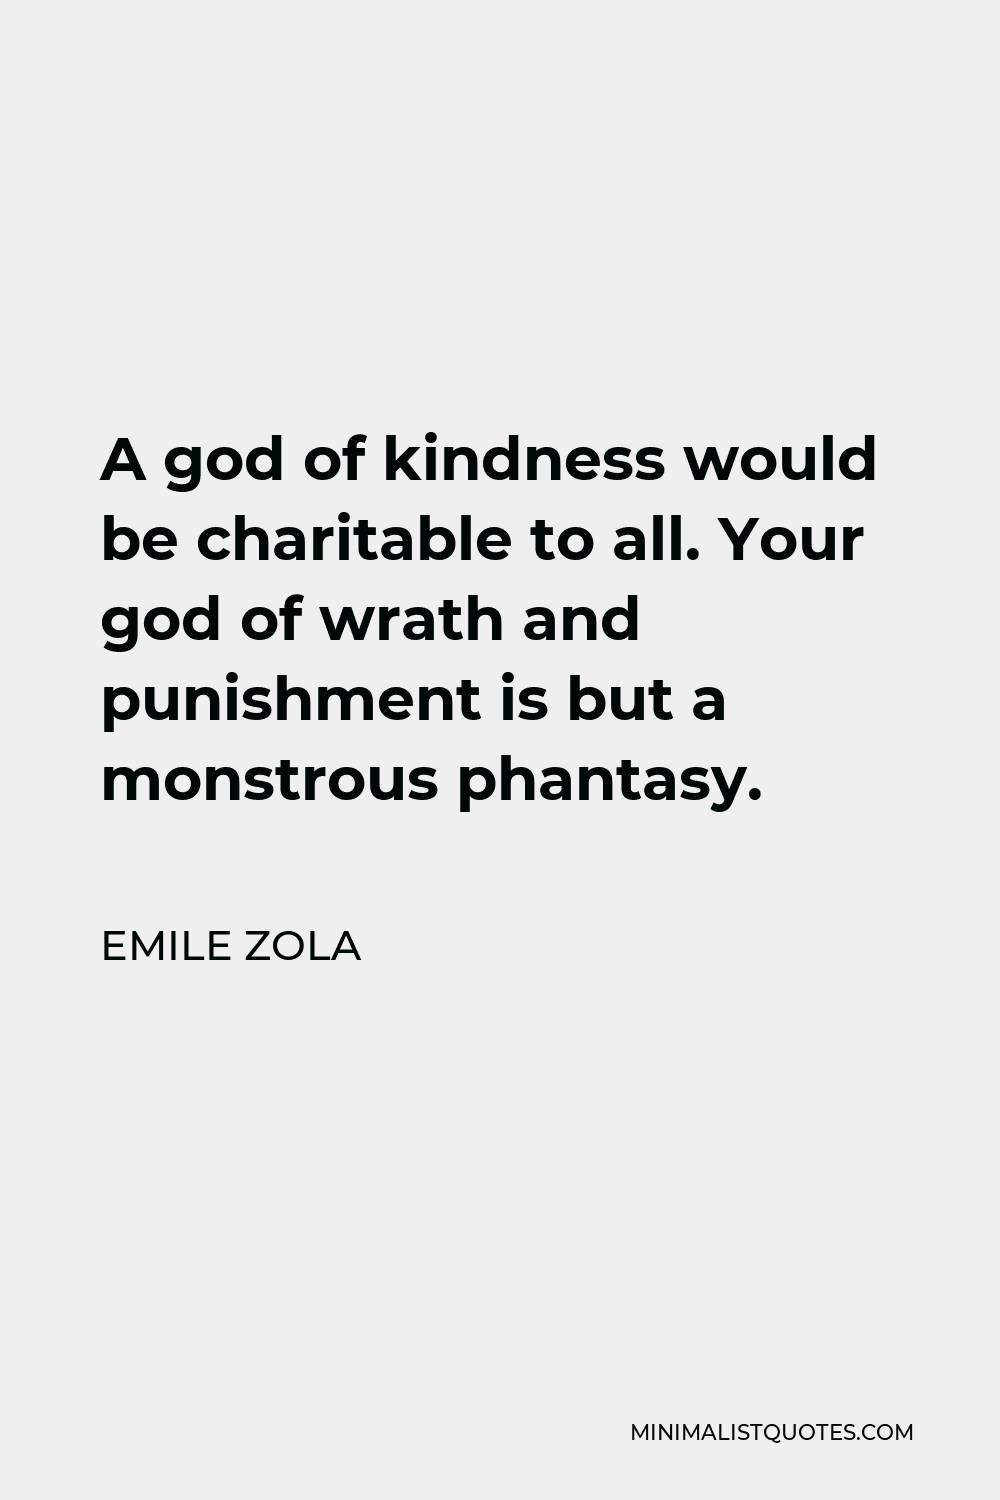 Emile Zola Quote - A god of kindness would be charitable to all. Your god of wrath and punishment is but a monstrous phantasy.